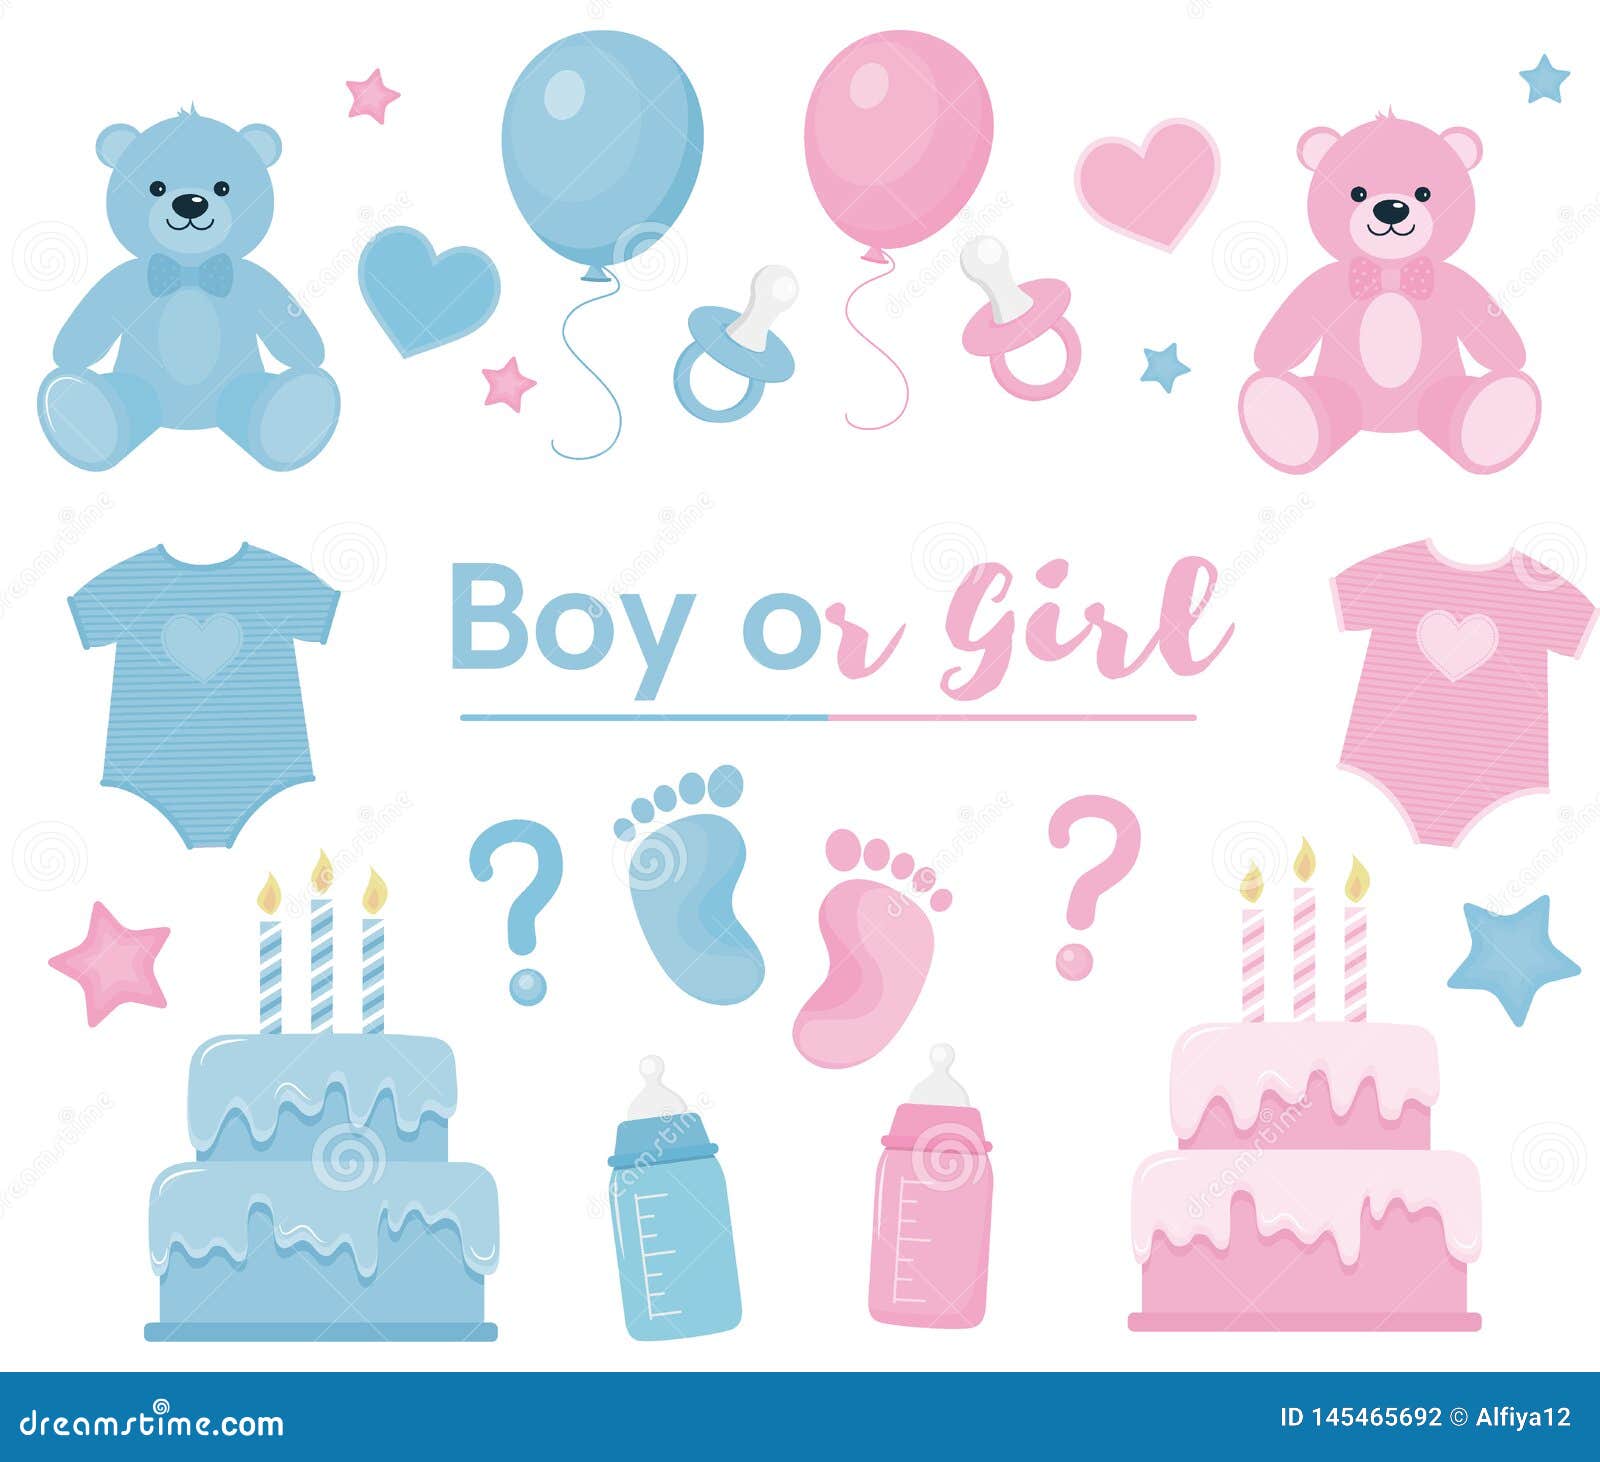 gender reveal clipart. blue and pink colors